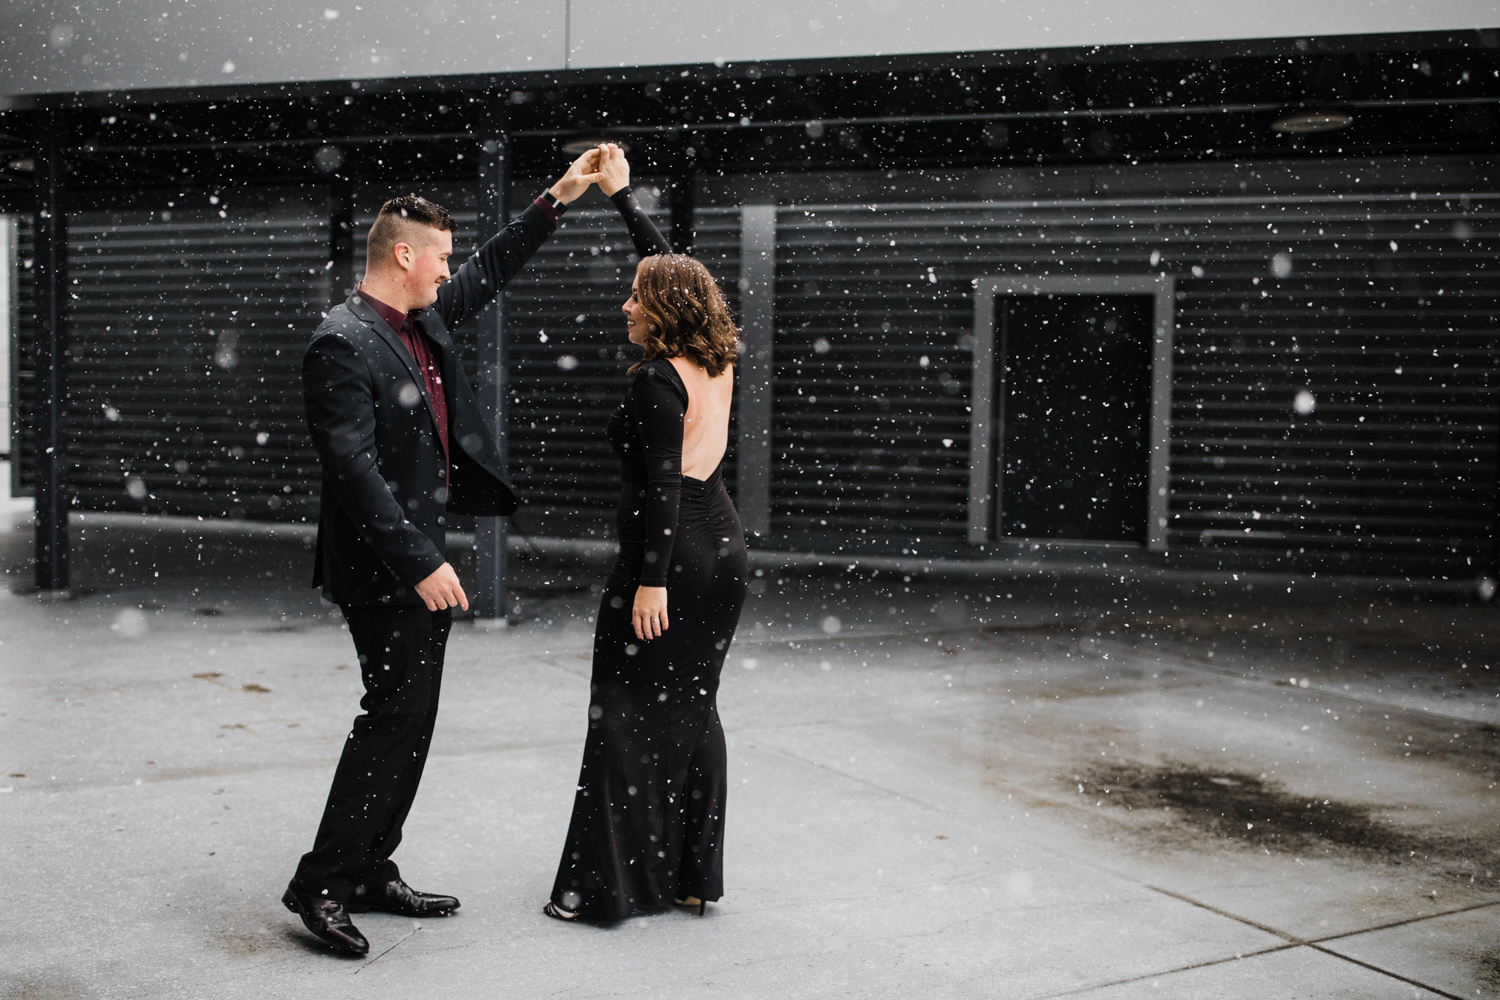 Brittany wanted an urban engagement session, which is not the easiest thing to produce in downtown Charleston, WV, but we utilized the newly renovated Civic Center and gave her a beautiful snowy photoshoot.